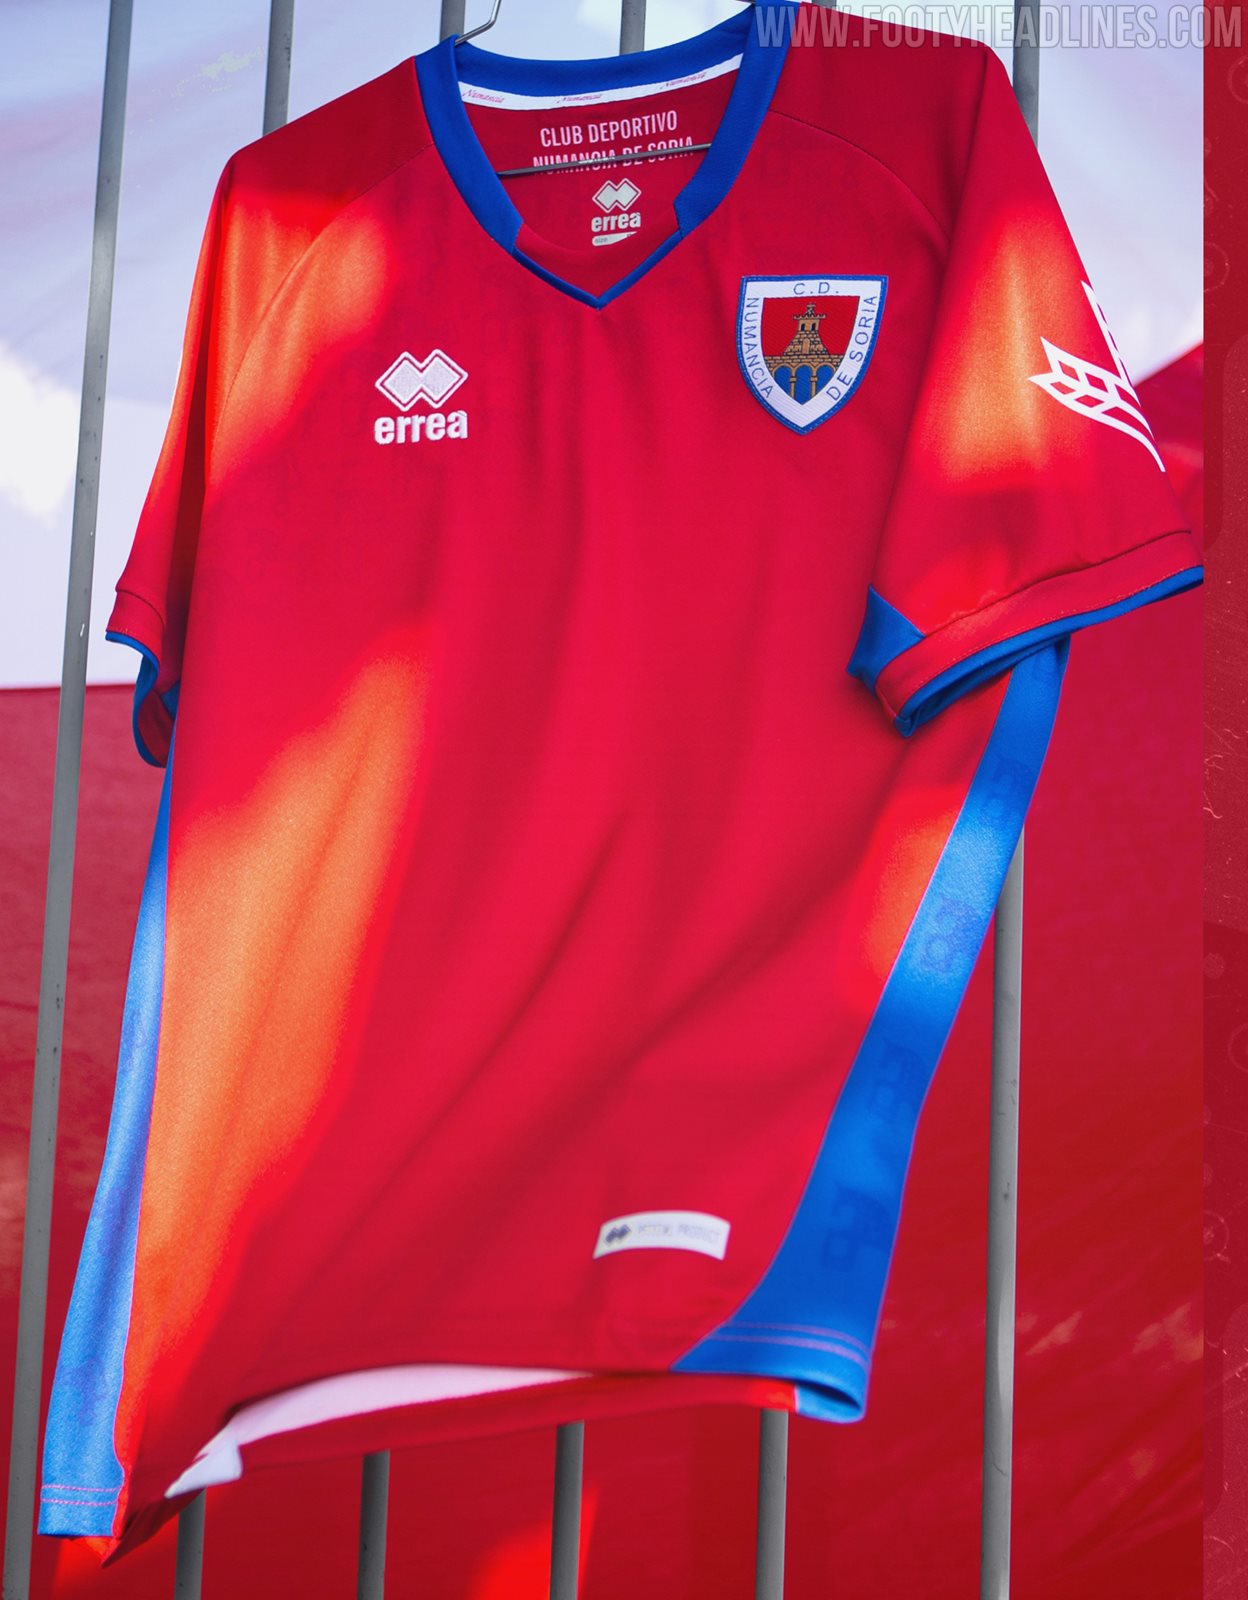 CD Numancia 20-21 Home & Away Kits Released - Small Error Due To ...